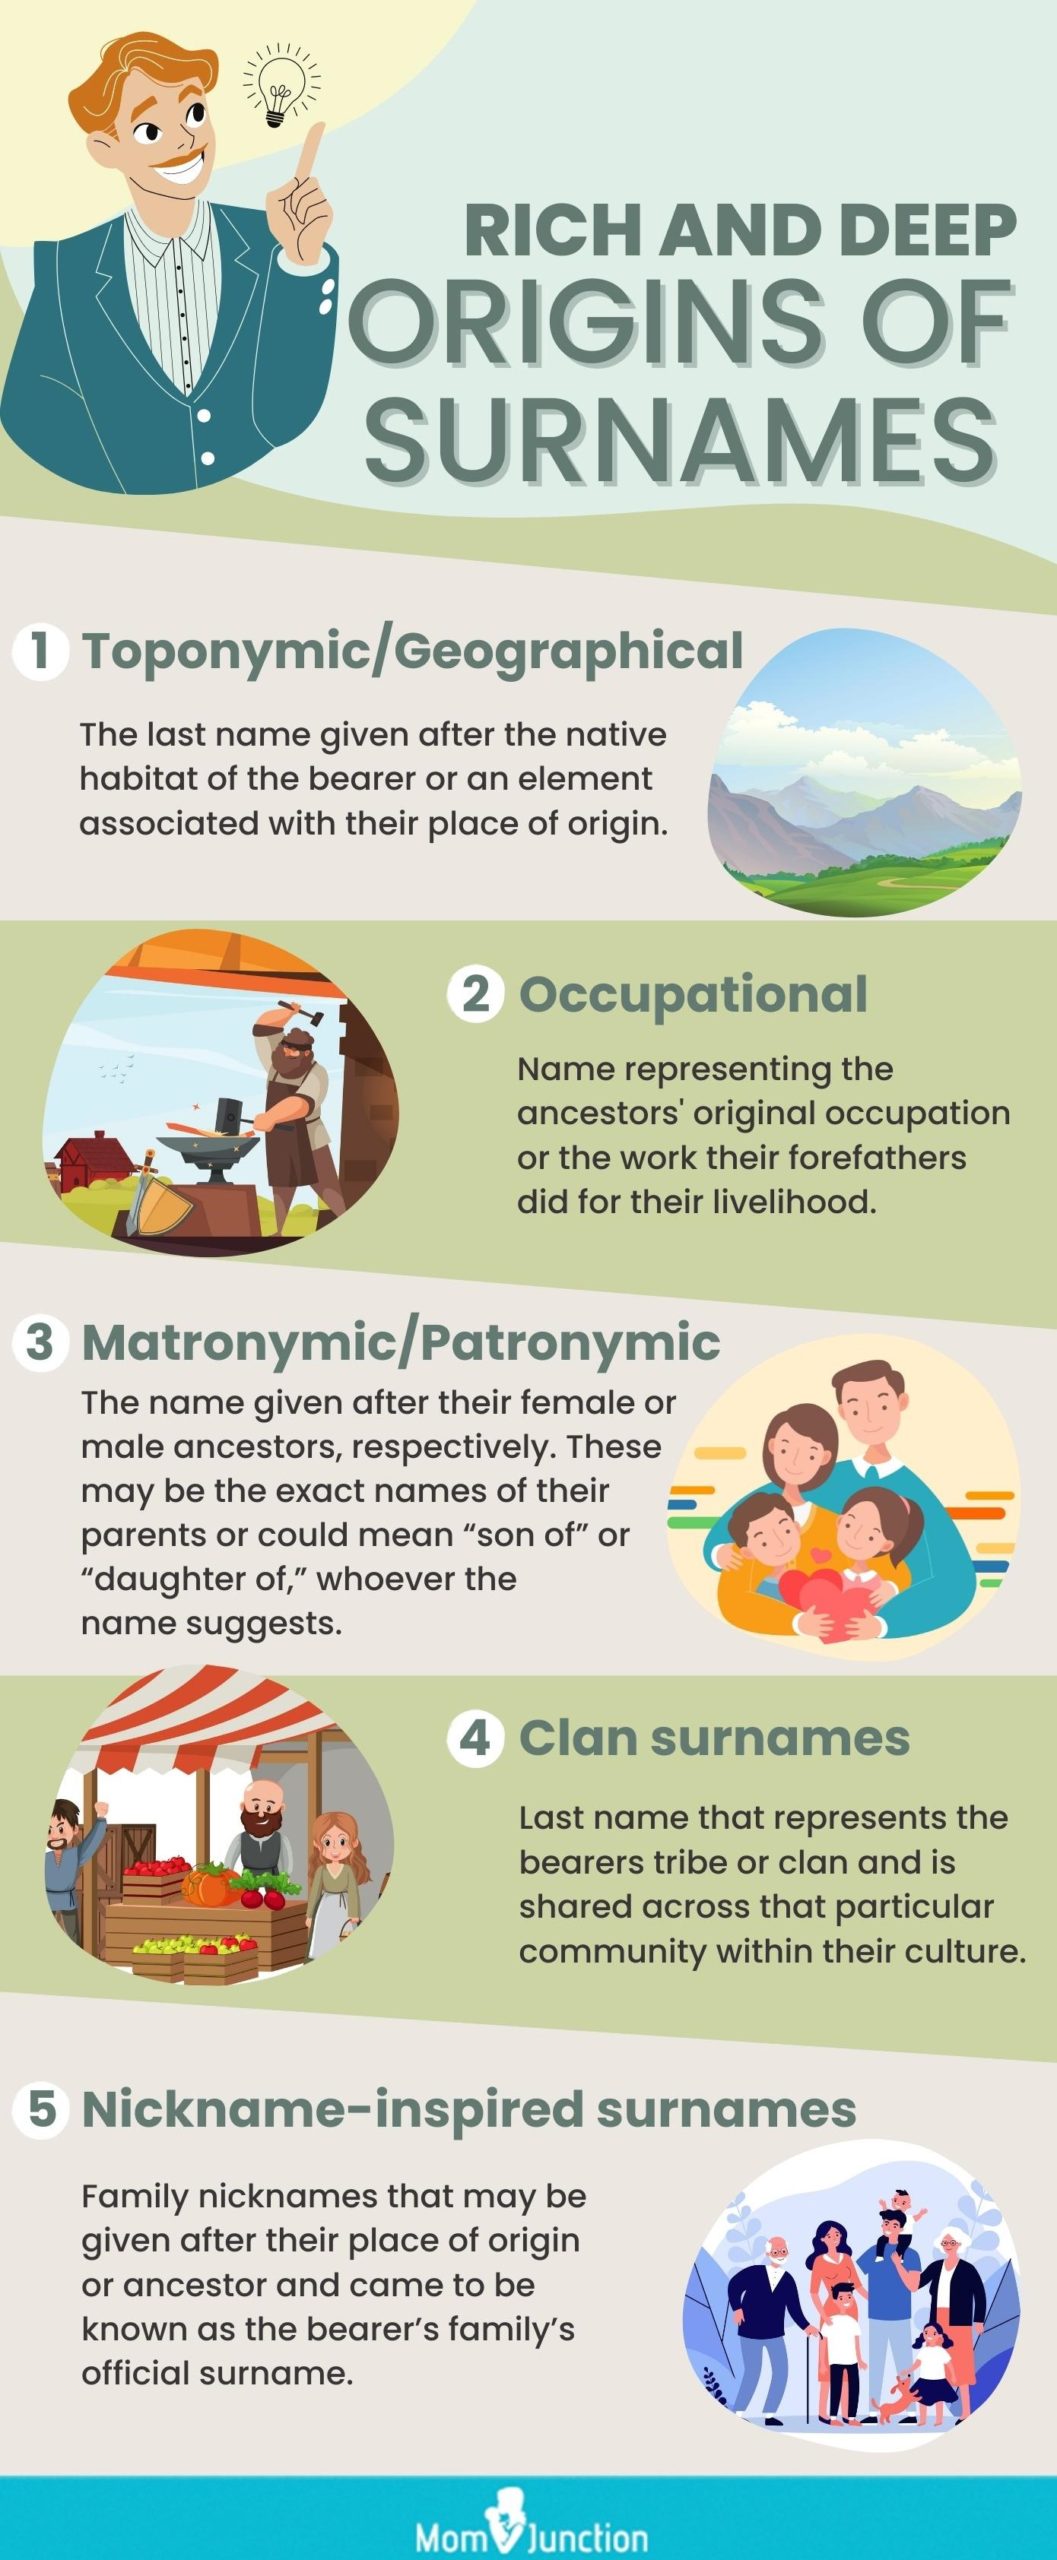 rich and deep orgins of surname (infographic)